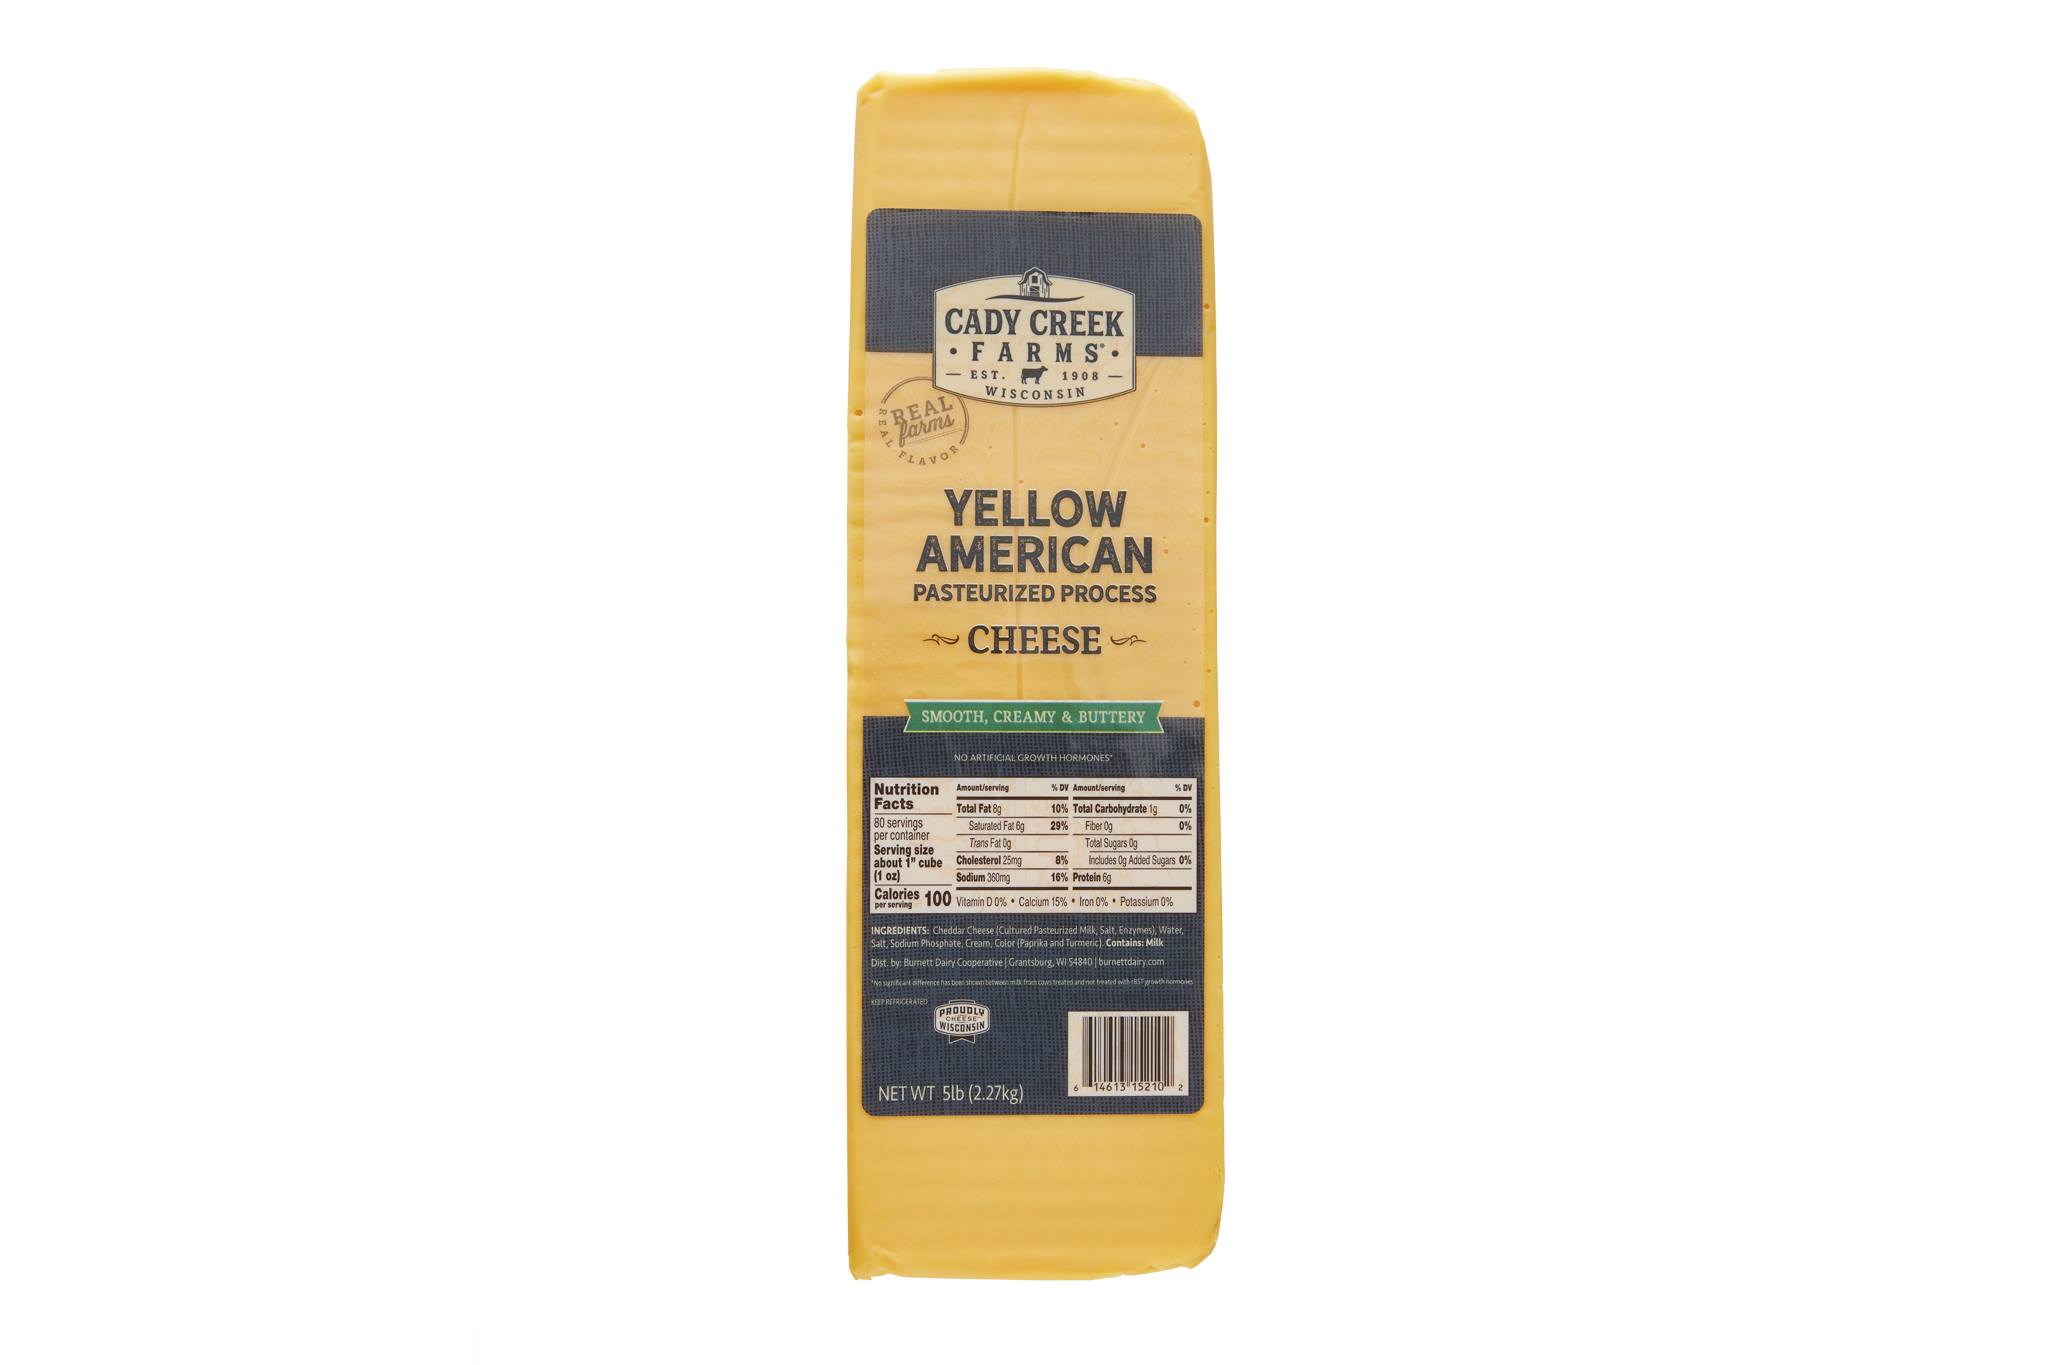 Cady Creek Farms 5 lb yellow american in package